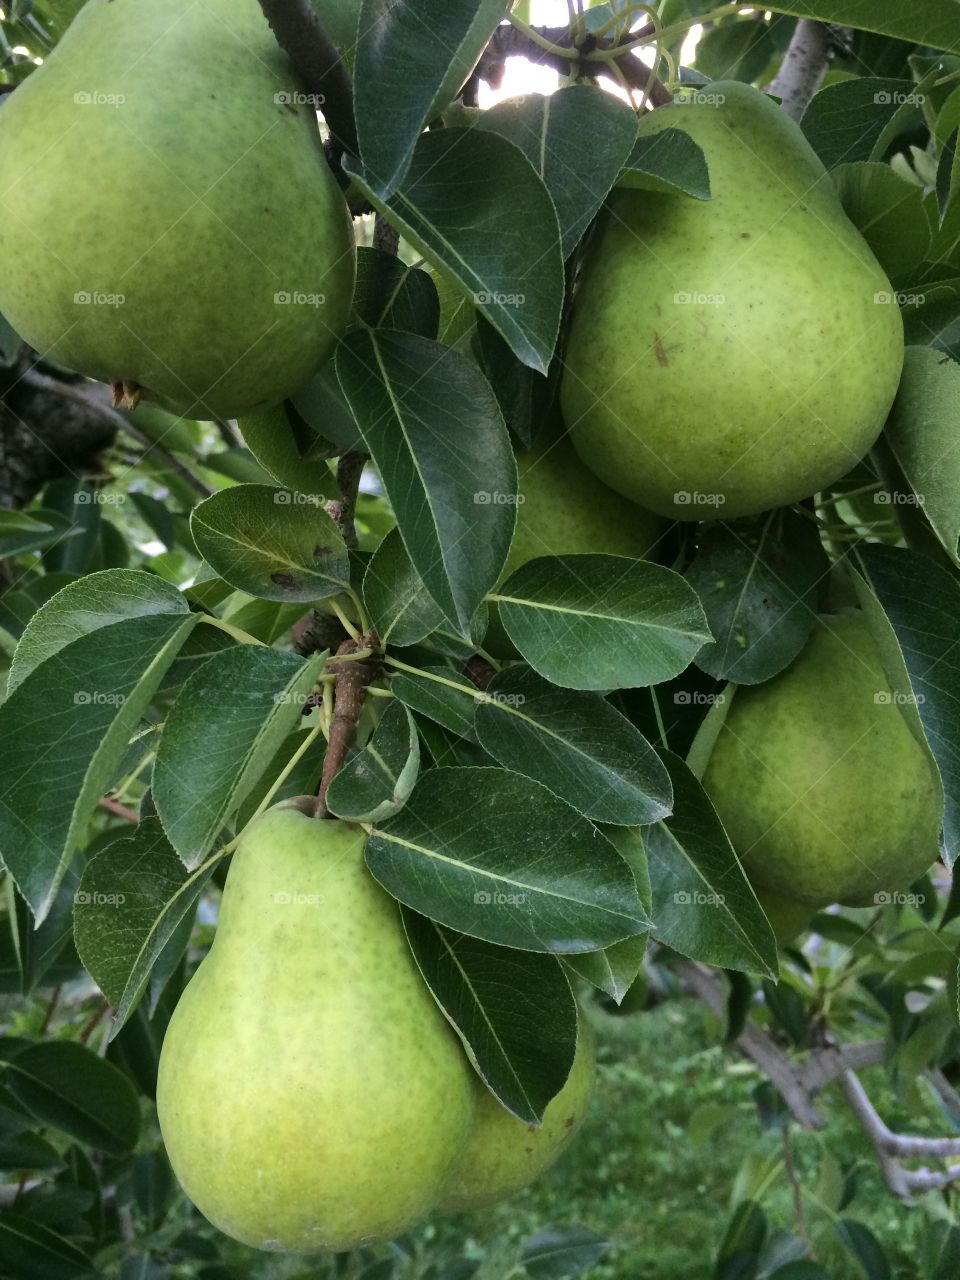 Bartlett pears in tree ready for harvesting.  